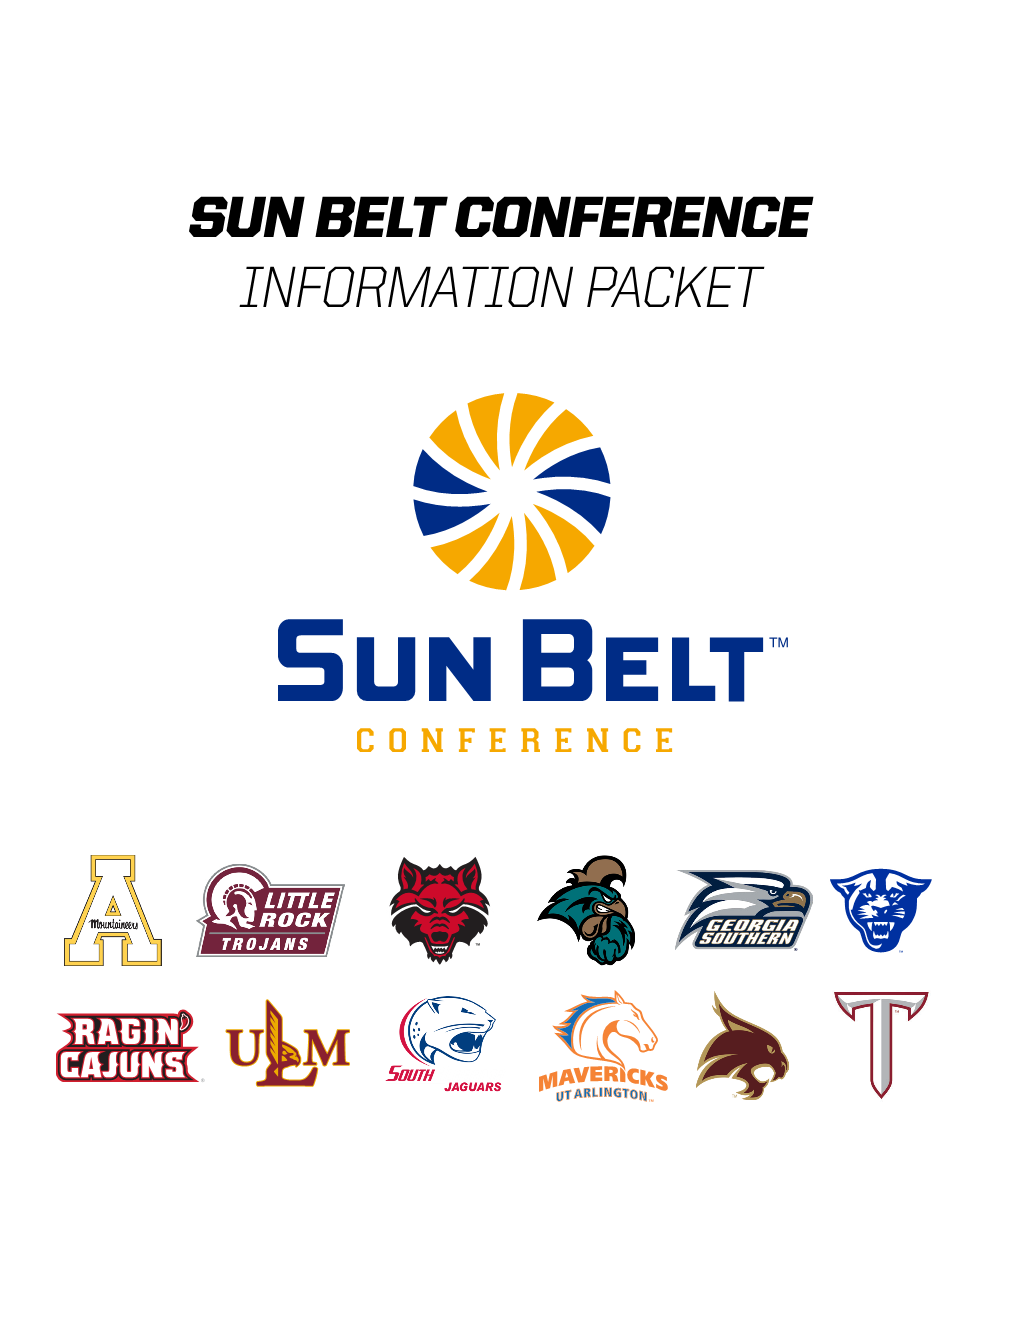 Sun Belt Conference Information Packet the Sun Belt Conference Membership at a Glance